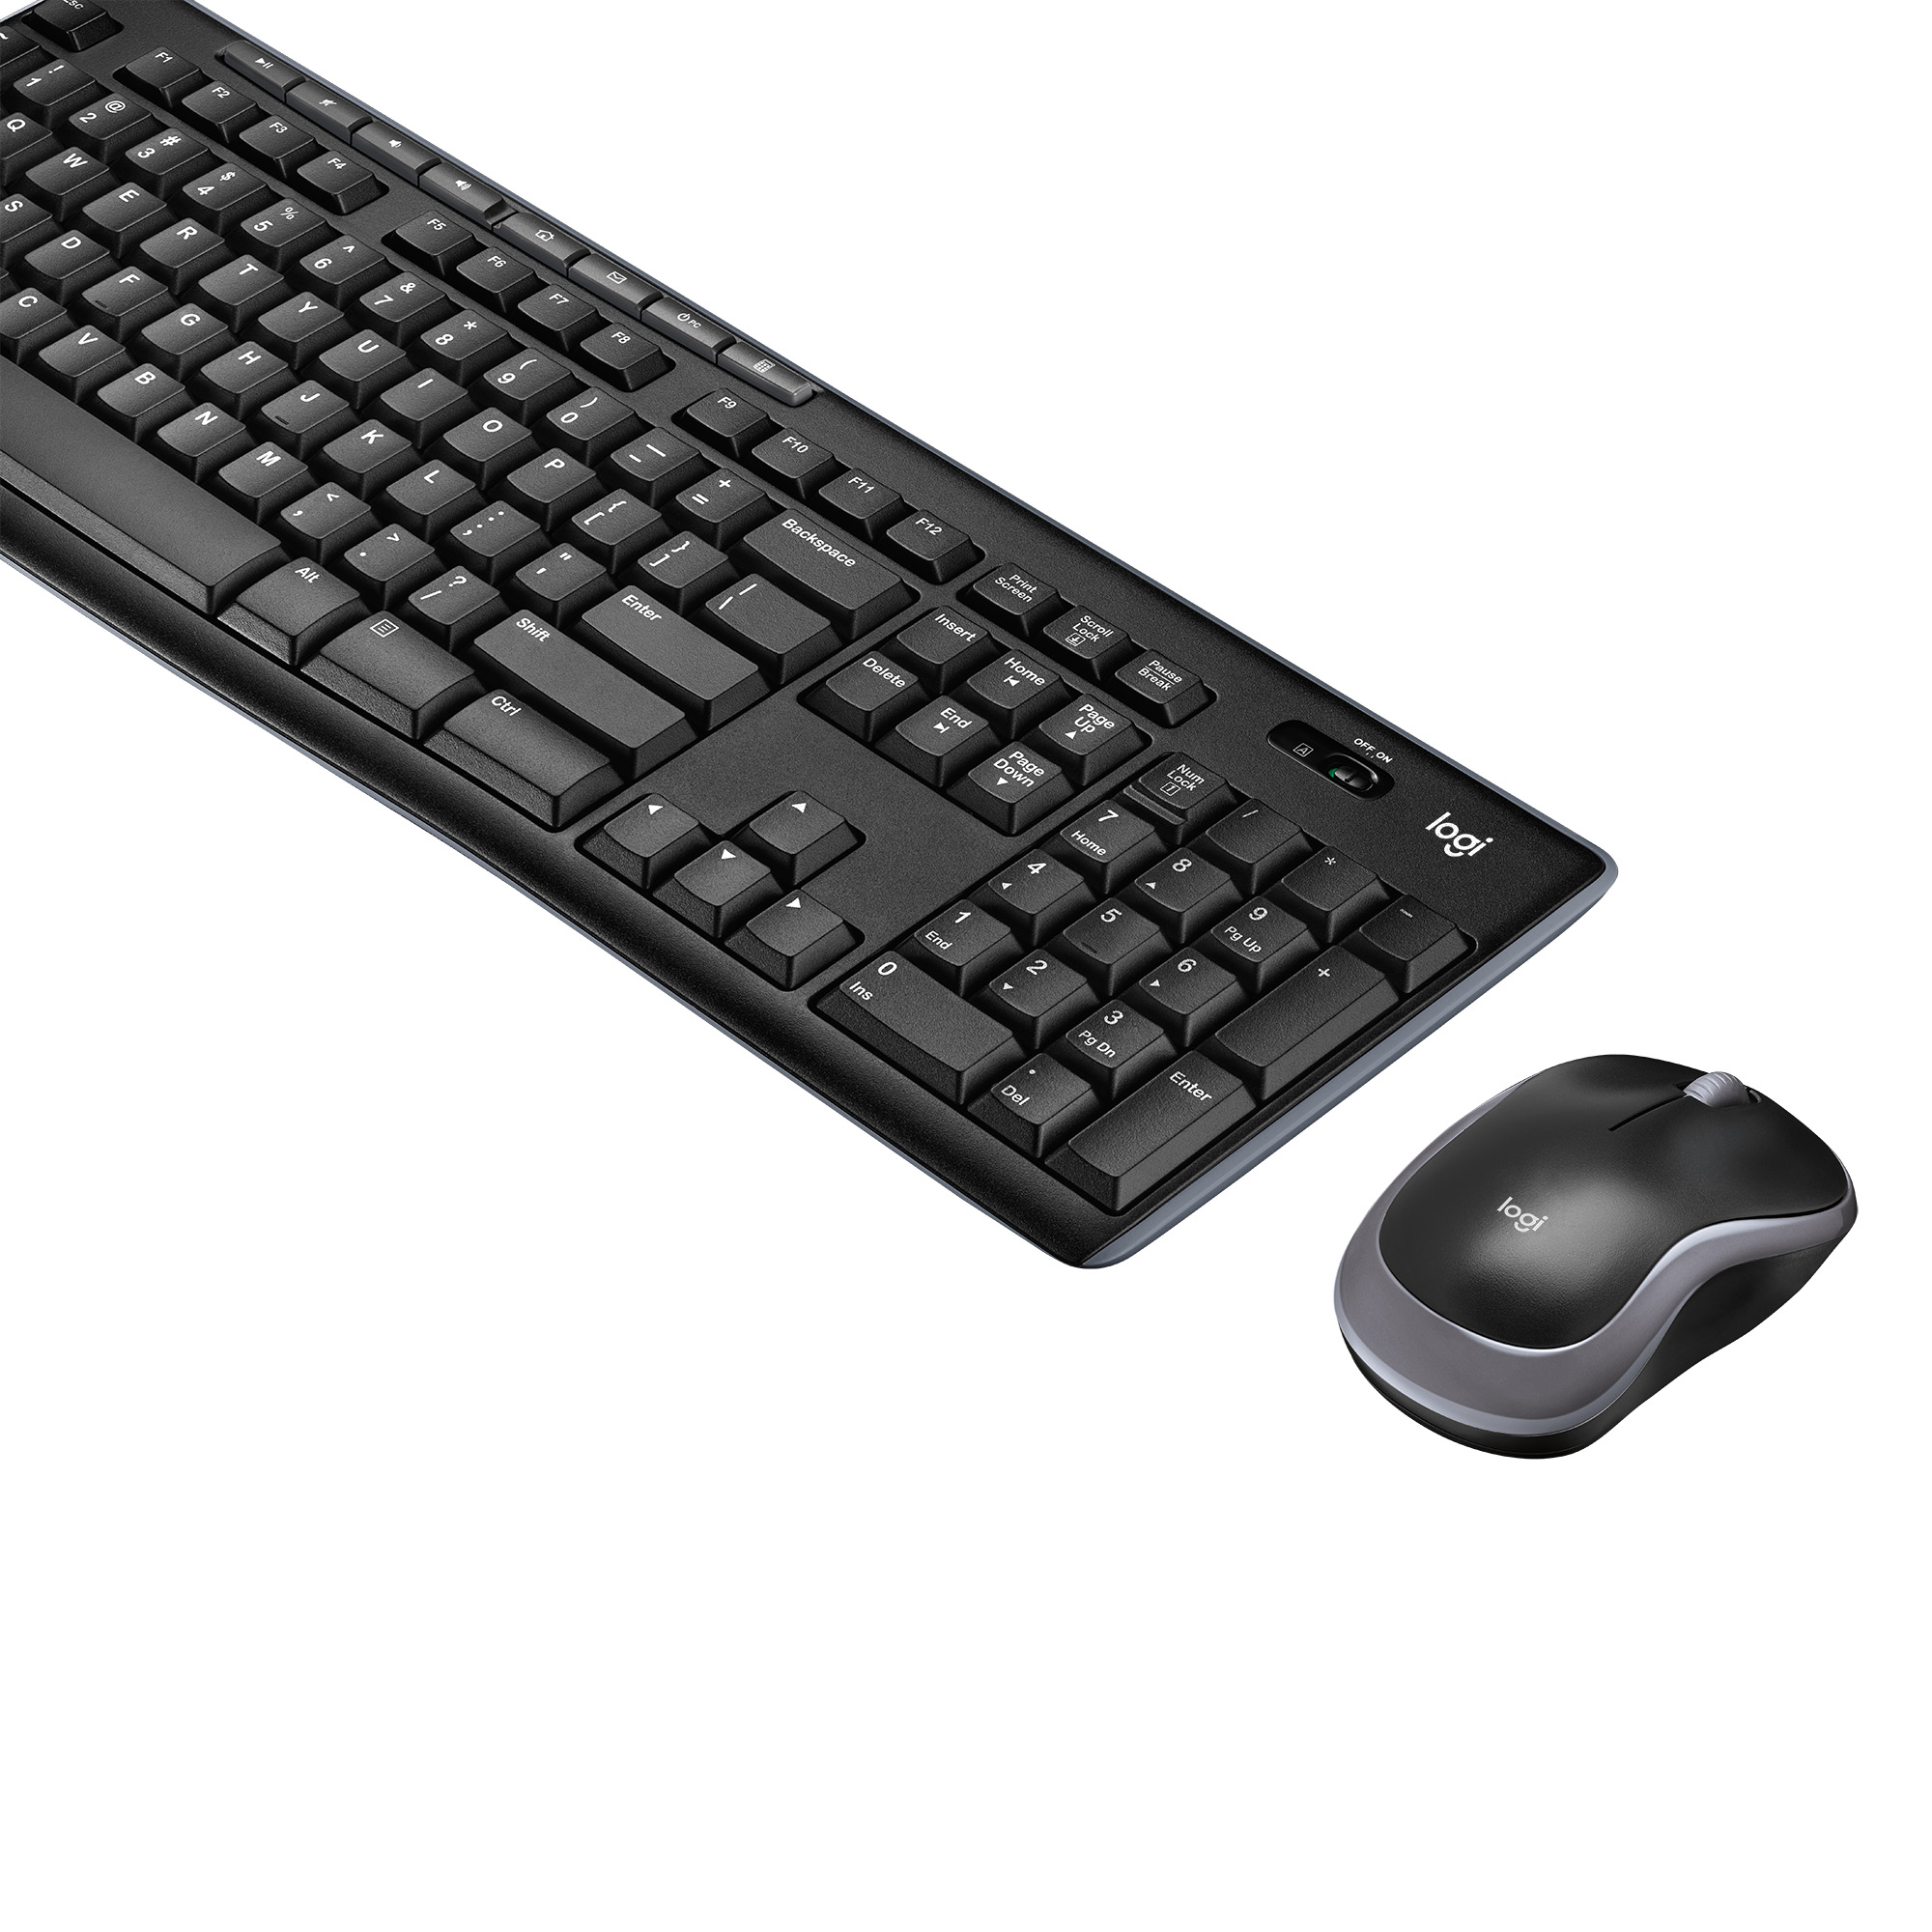 Logitech Wireless Keyboard and Mouse Combo for Windows, 2.4 GHz Wireless, Compact Mouse, 8 Multimedia and Shortcut Keys, 2-Year Battery Life, for PC, Laptop - image 3 of 6